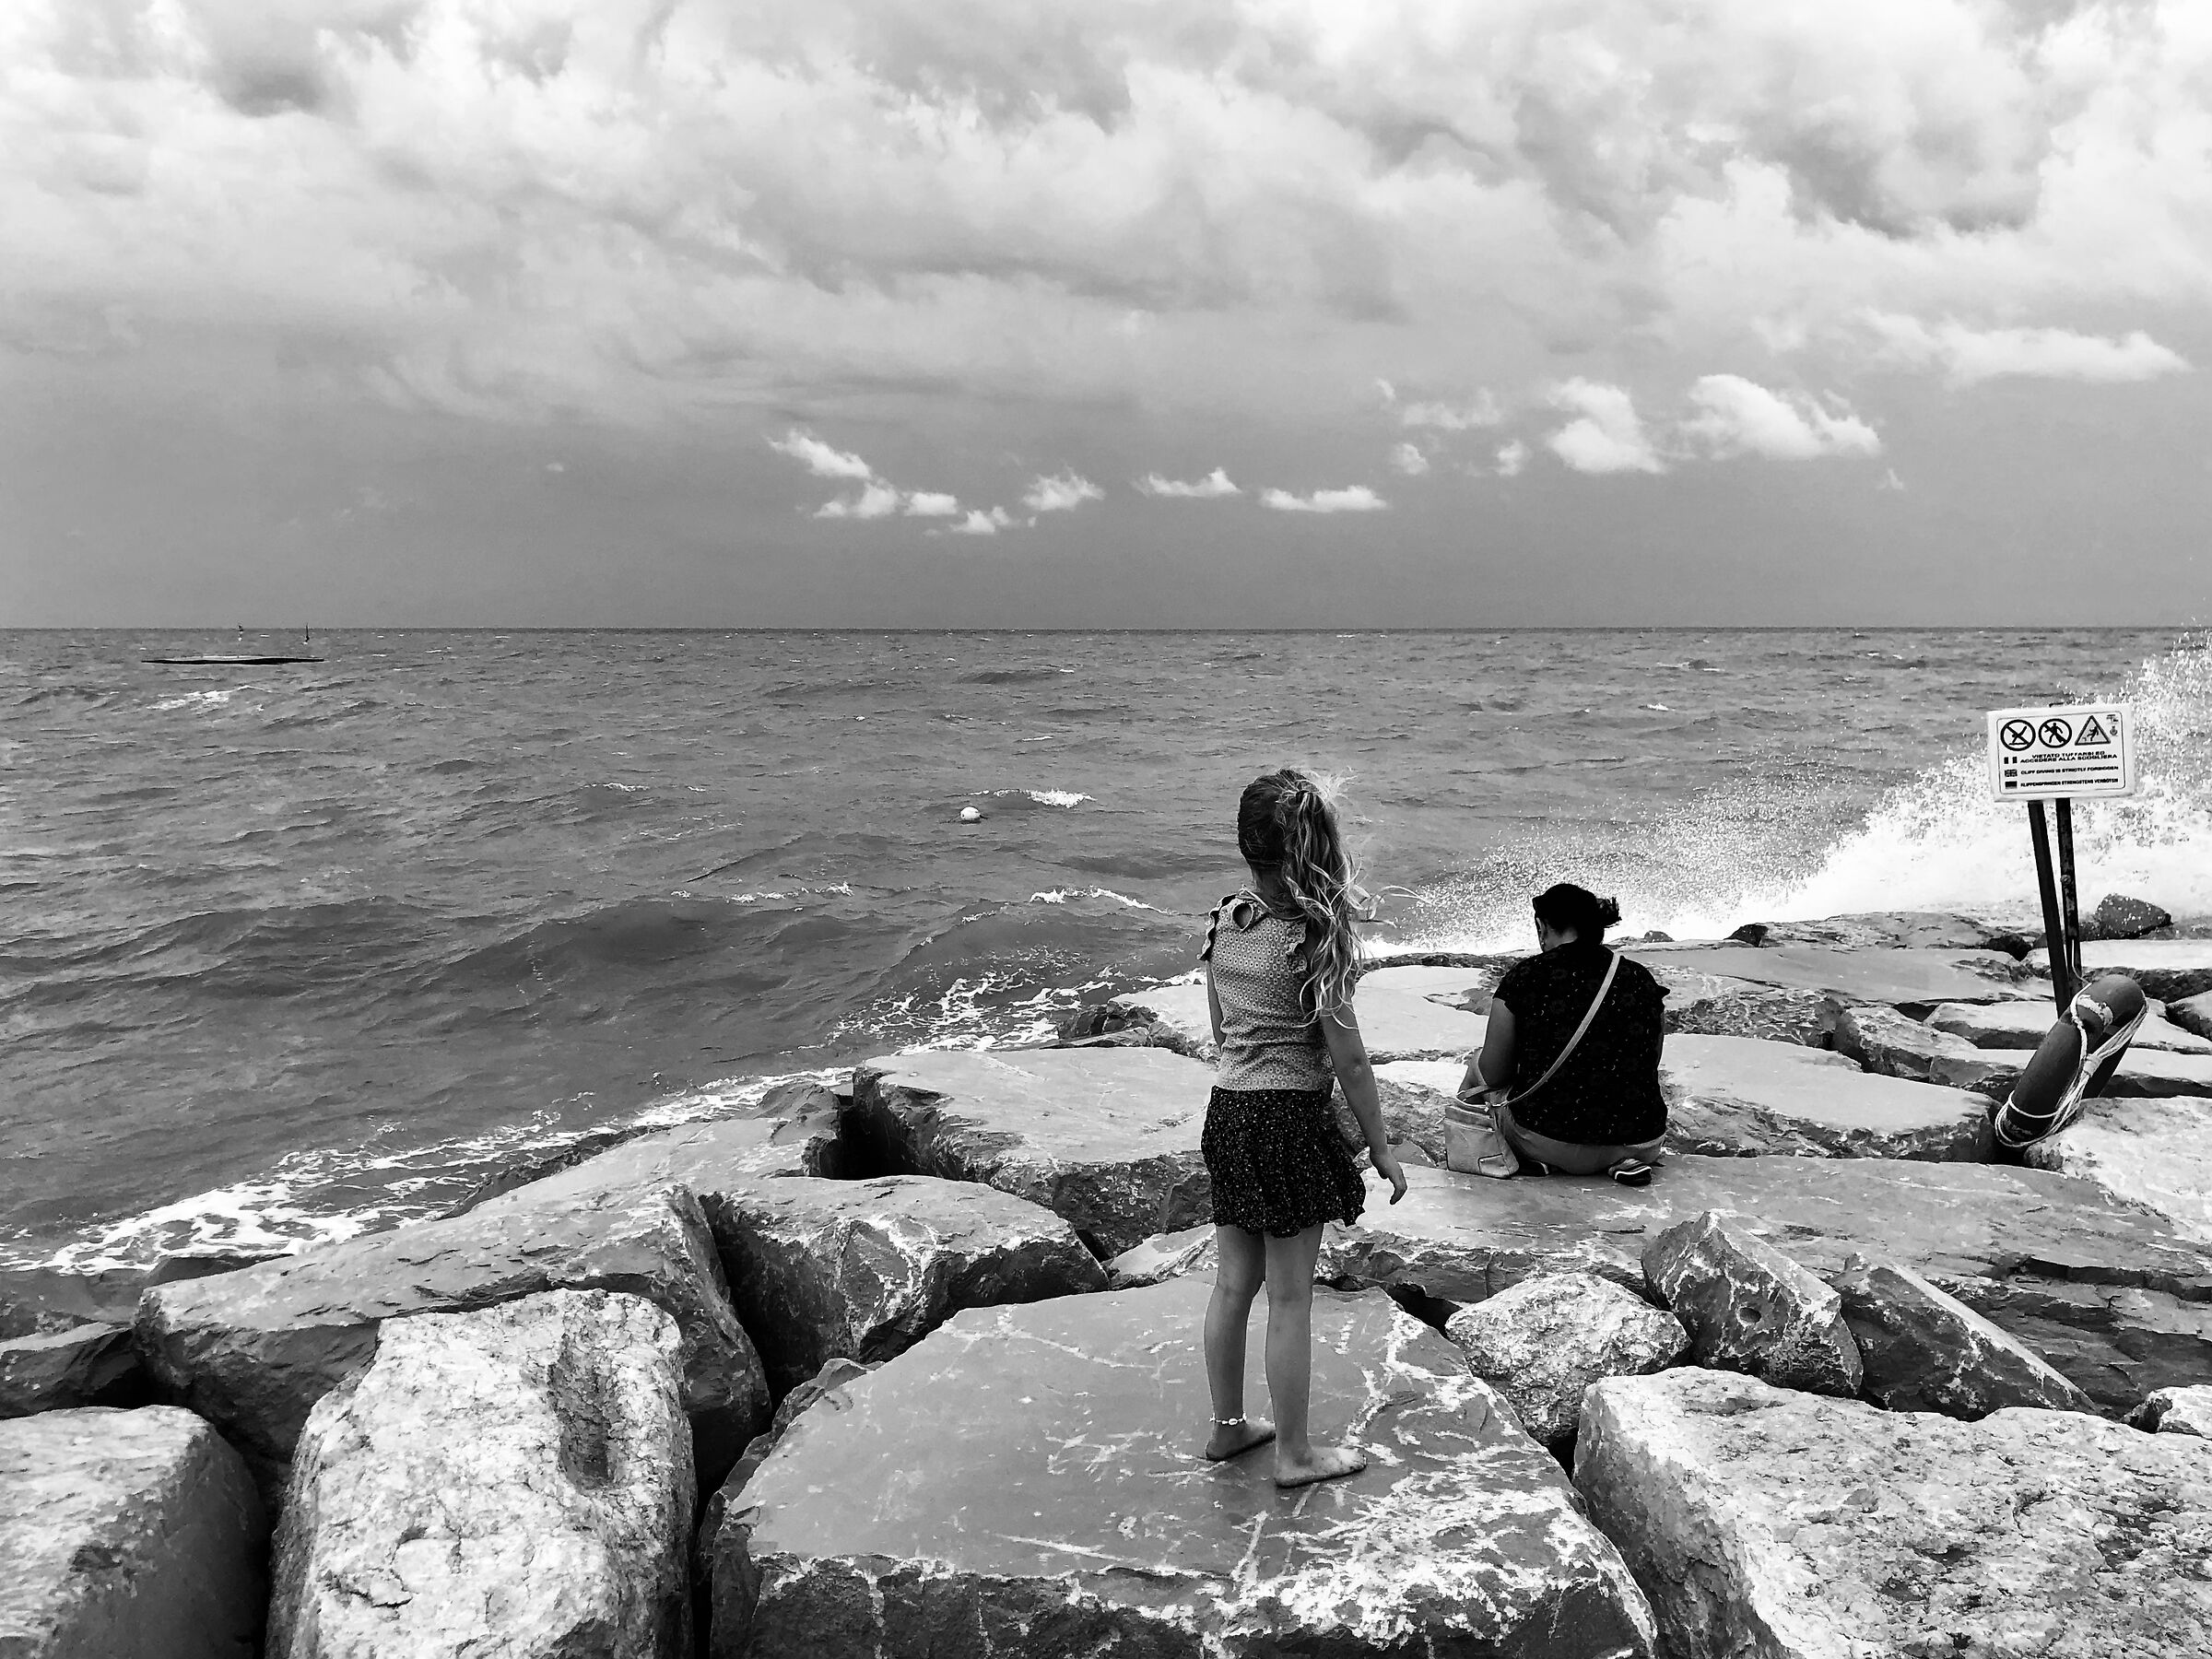 The little girl and the rough sea...